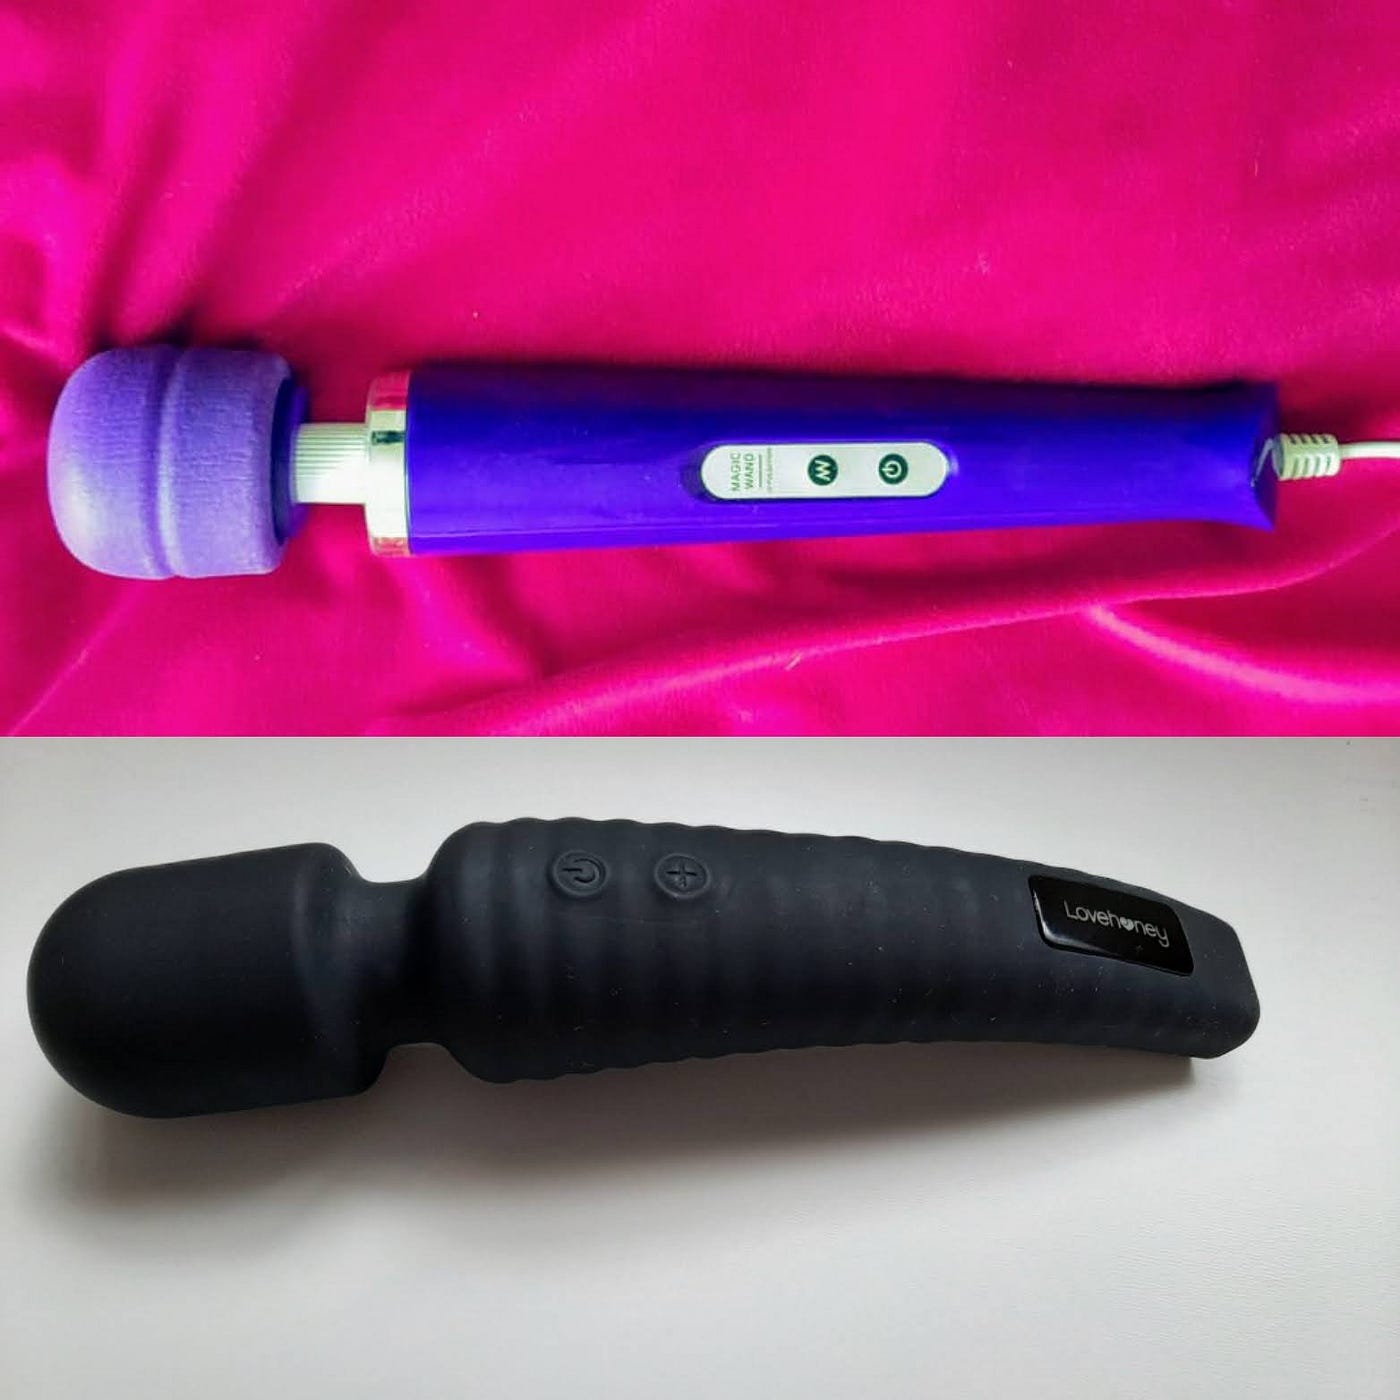 How to Make the Best of the Magic Wand Vibrator During Sex by Emma London Emma London writes Medium